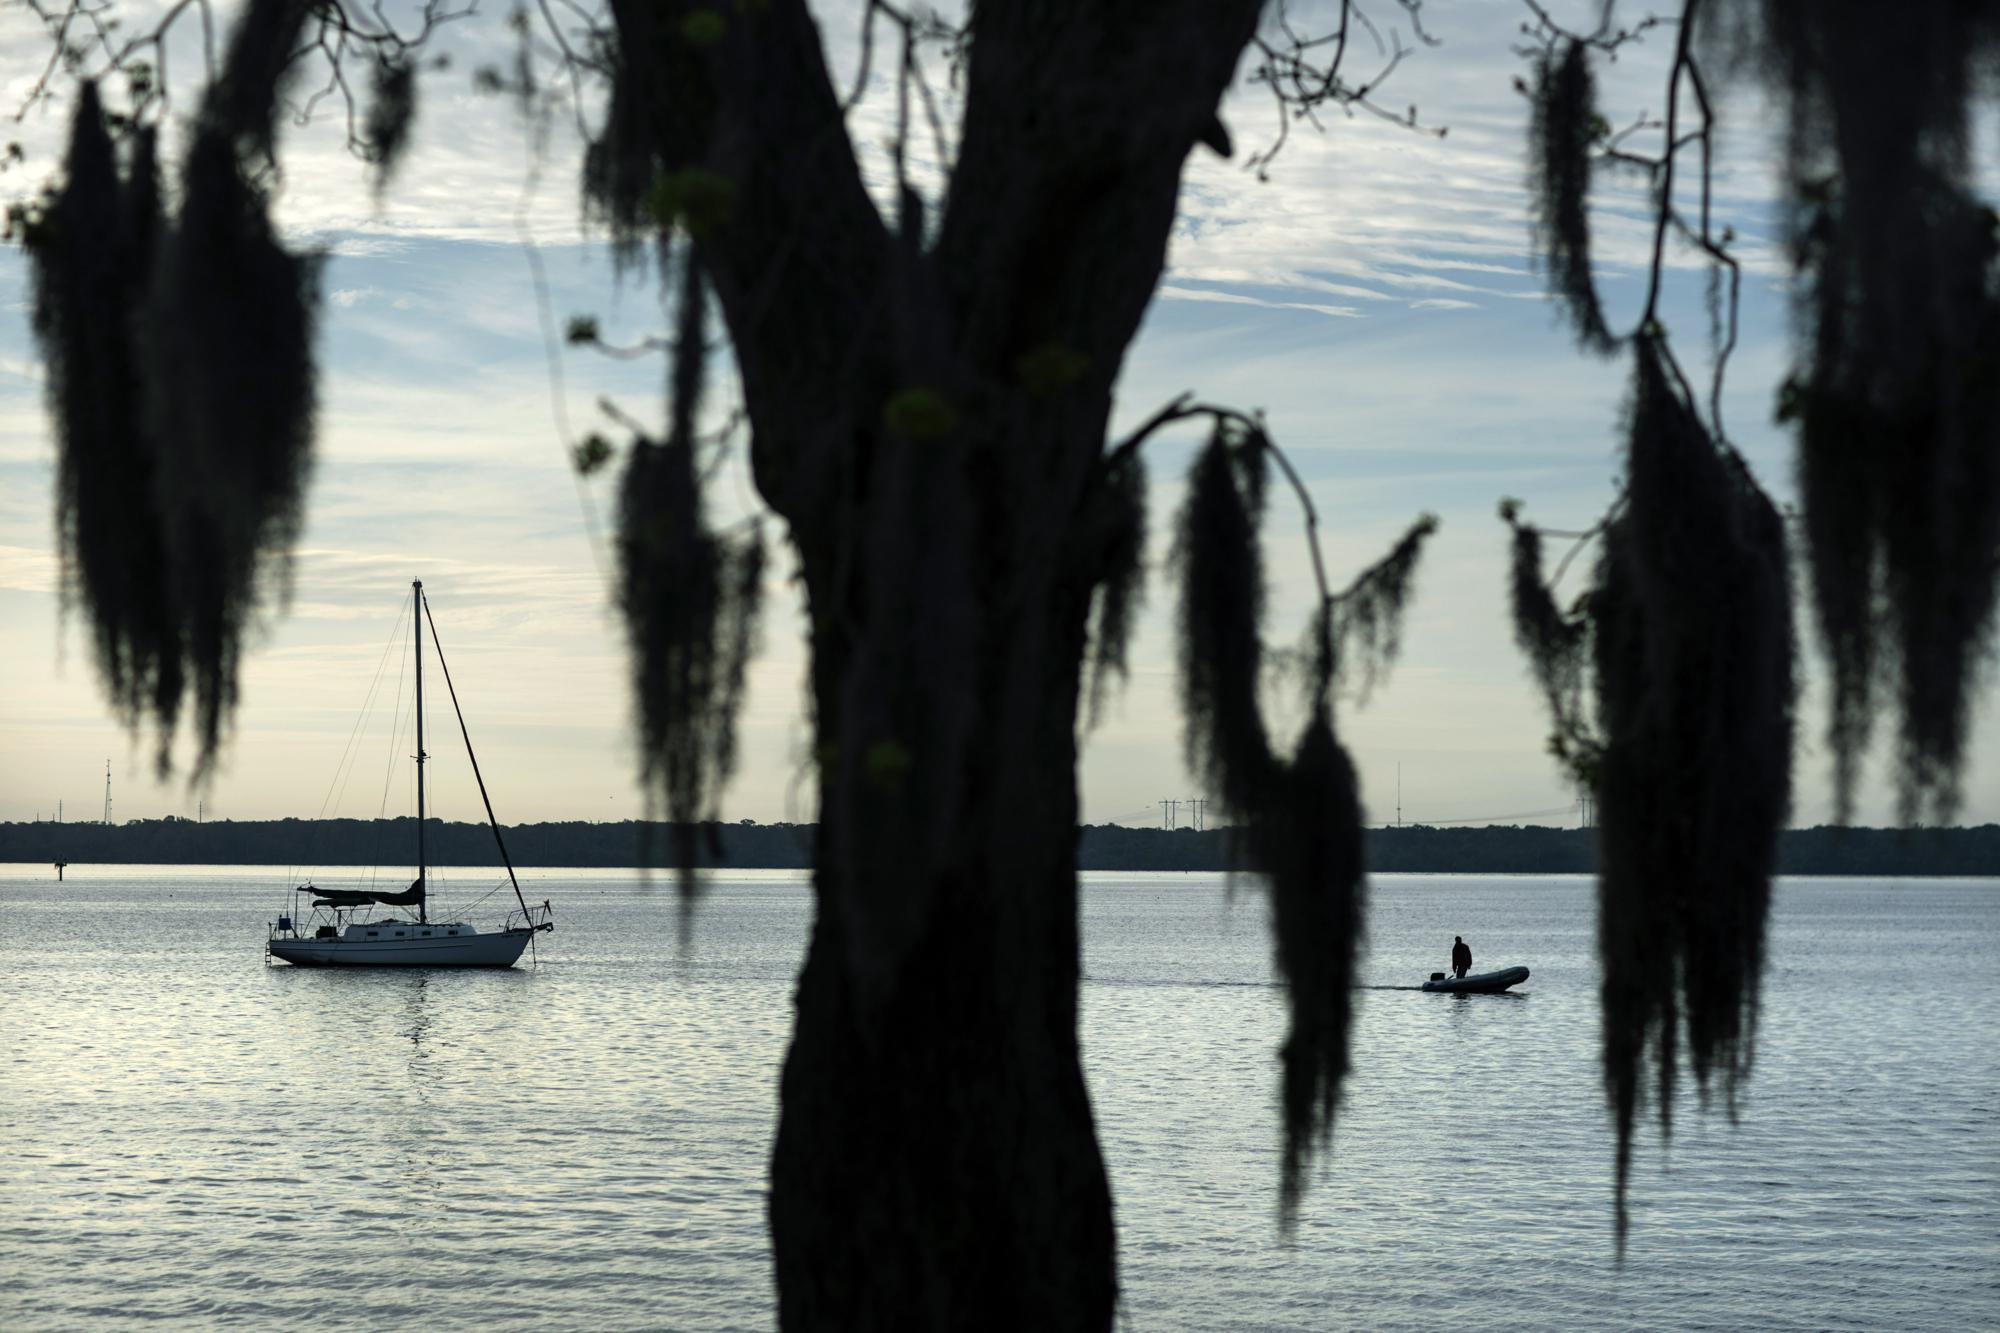 Spanish moss hangs from a tree along the St. Johns River in Palatka, Fla., Thursday, April 15, 2021. After months in a prison cell, Warren Williams longed to fish the St. Johns again. He looked forward to spending days outdoors in his landscaping job, and to writing poems and music in his free time. (AP Photo/David Goldman)